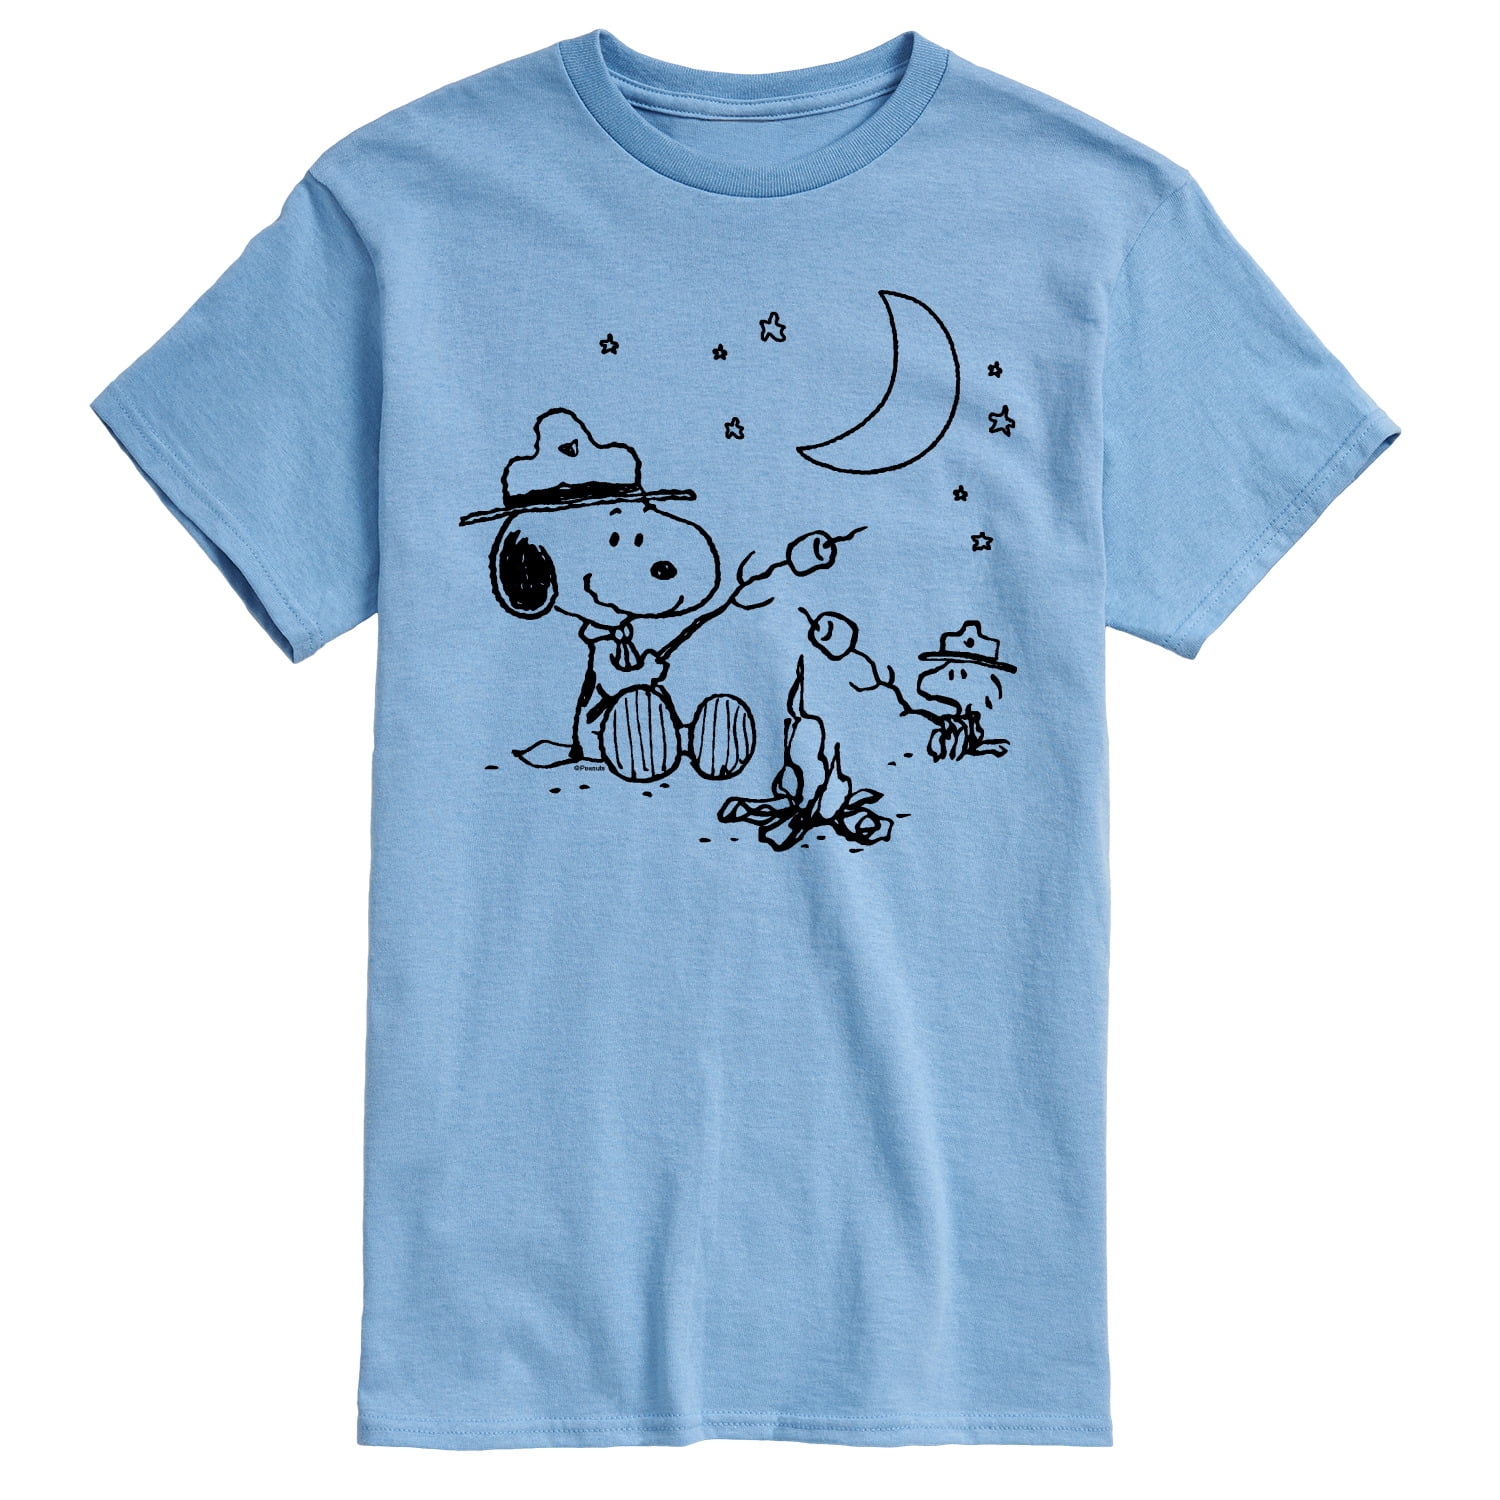 - - T-Shirt Peanuts Snoopy Camping Graphic Men\'s Sleeve Short